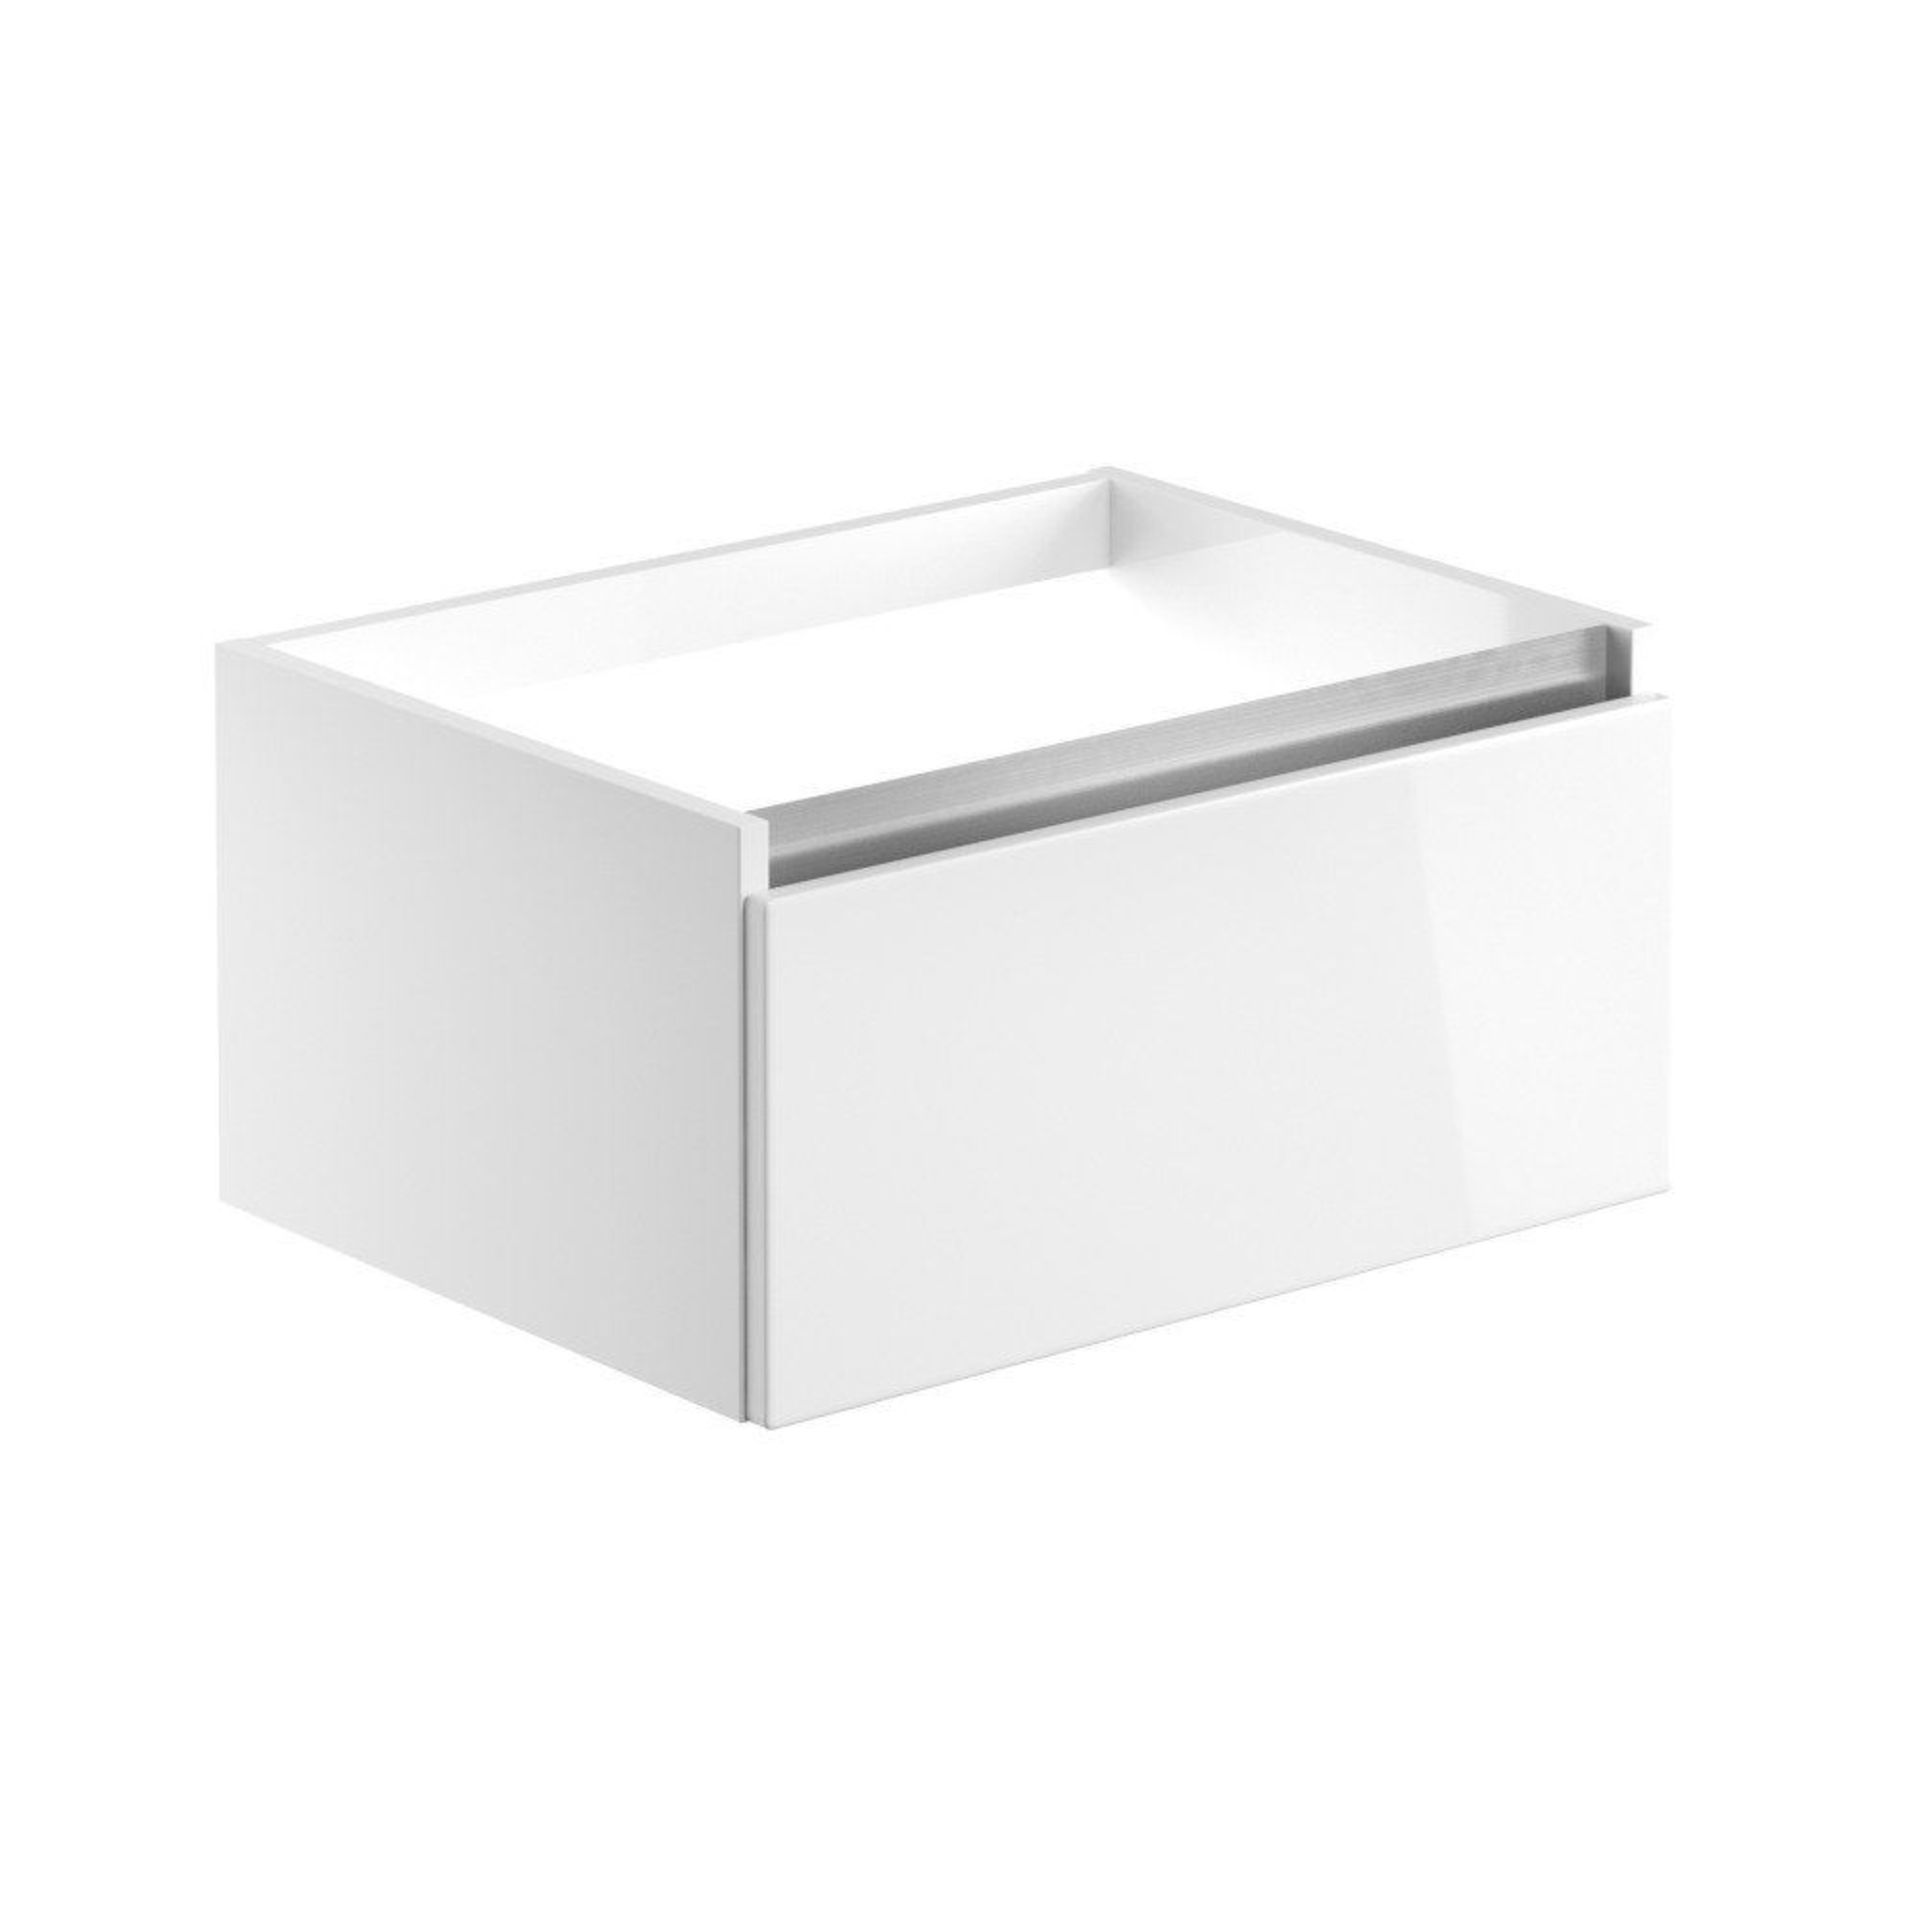 New (S124) Carino 600 mm 1 Drawer Wall Hung Vanity Unit. White Gloss. Fully Handle less Design....